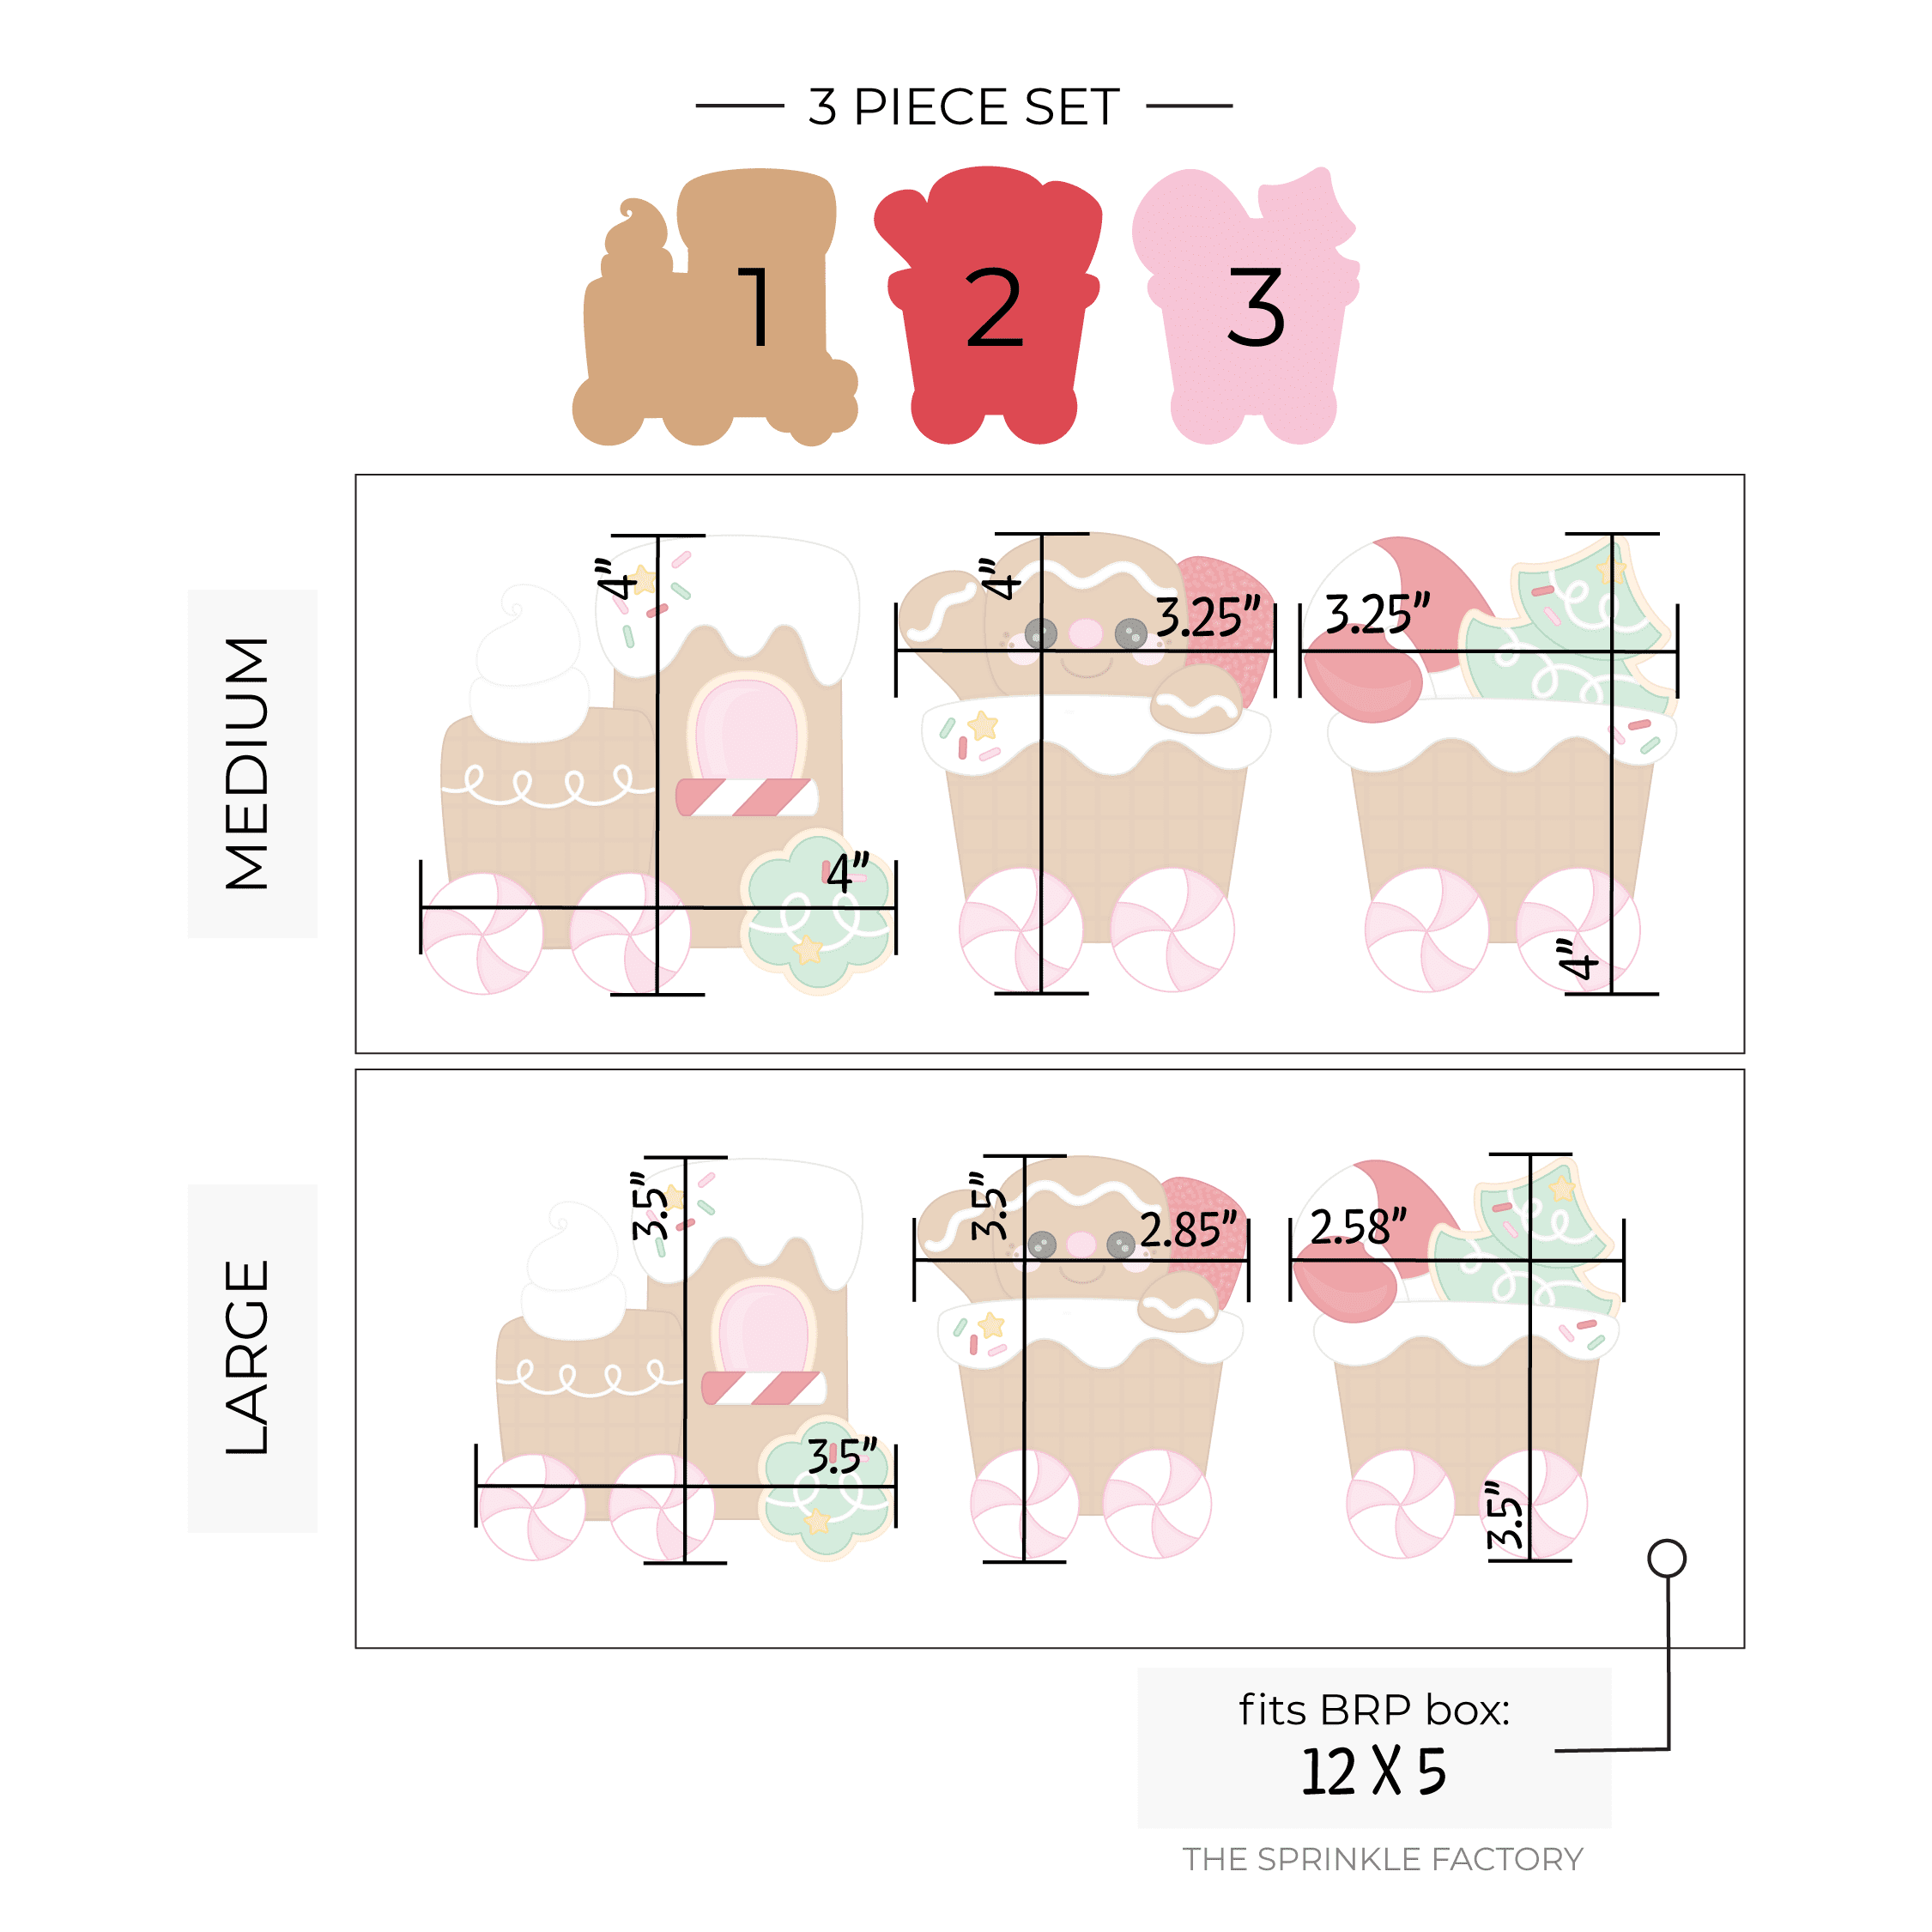 Clipart image of a 3 part gingerbread train broken down into two size options with sizes listed.